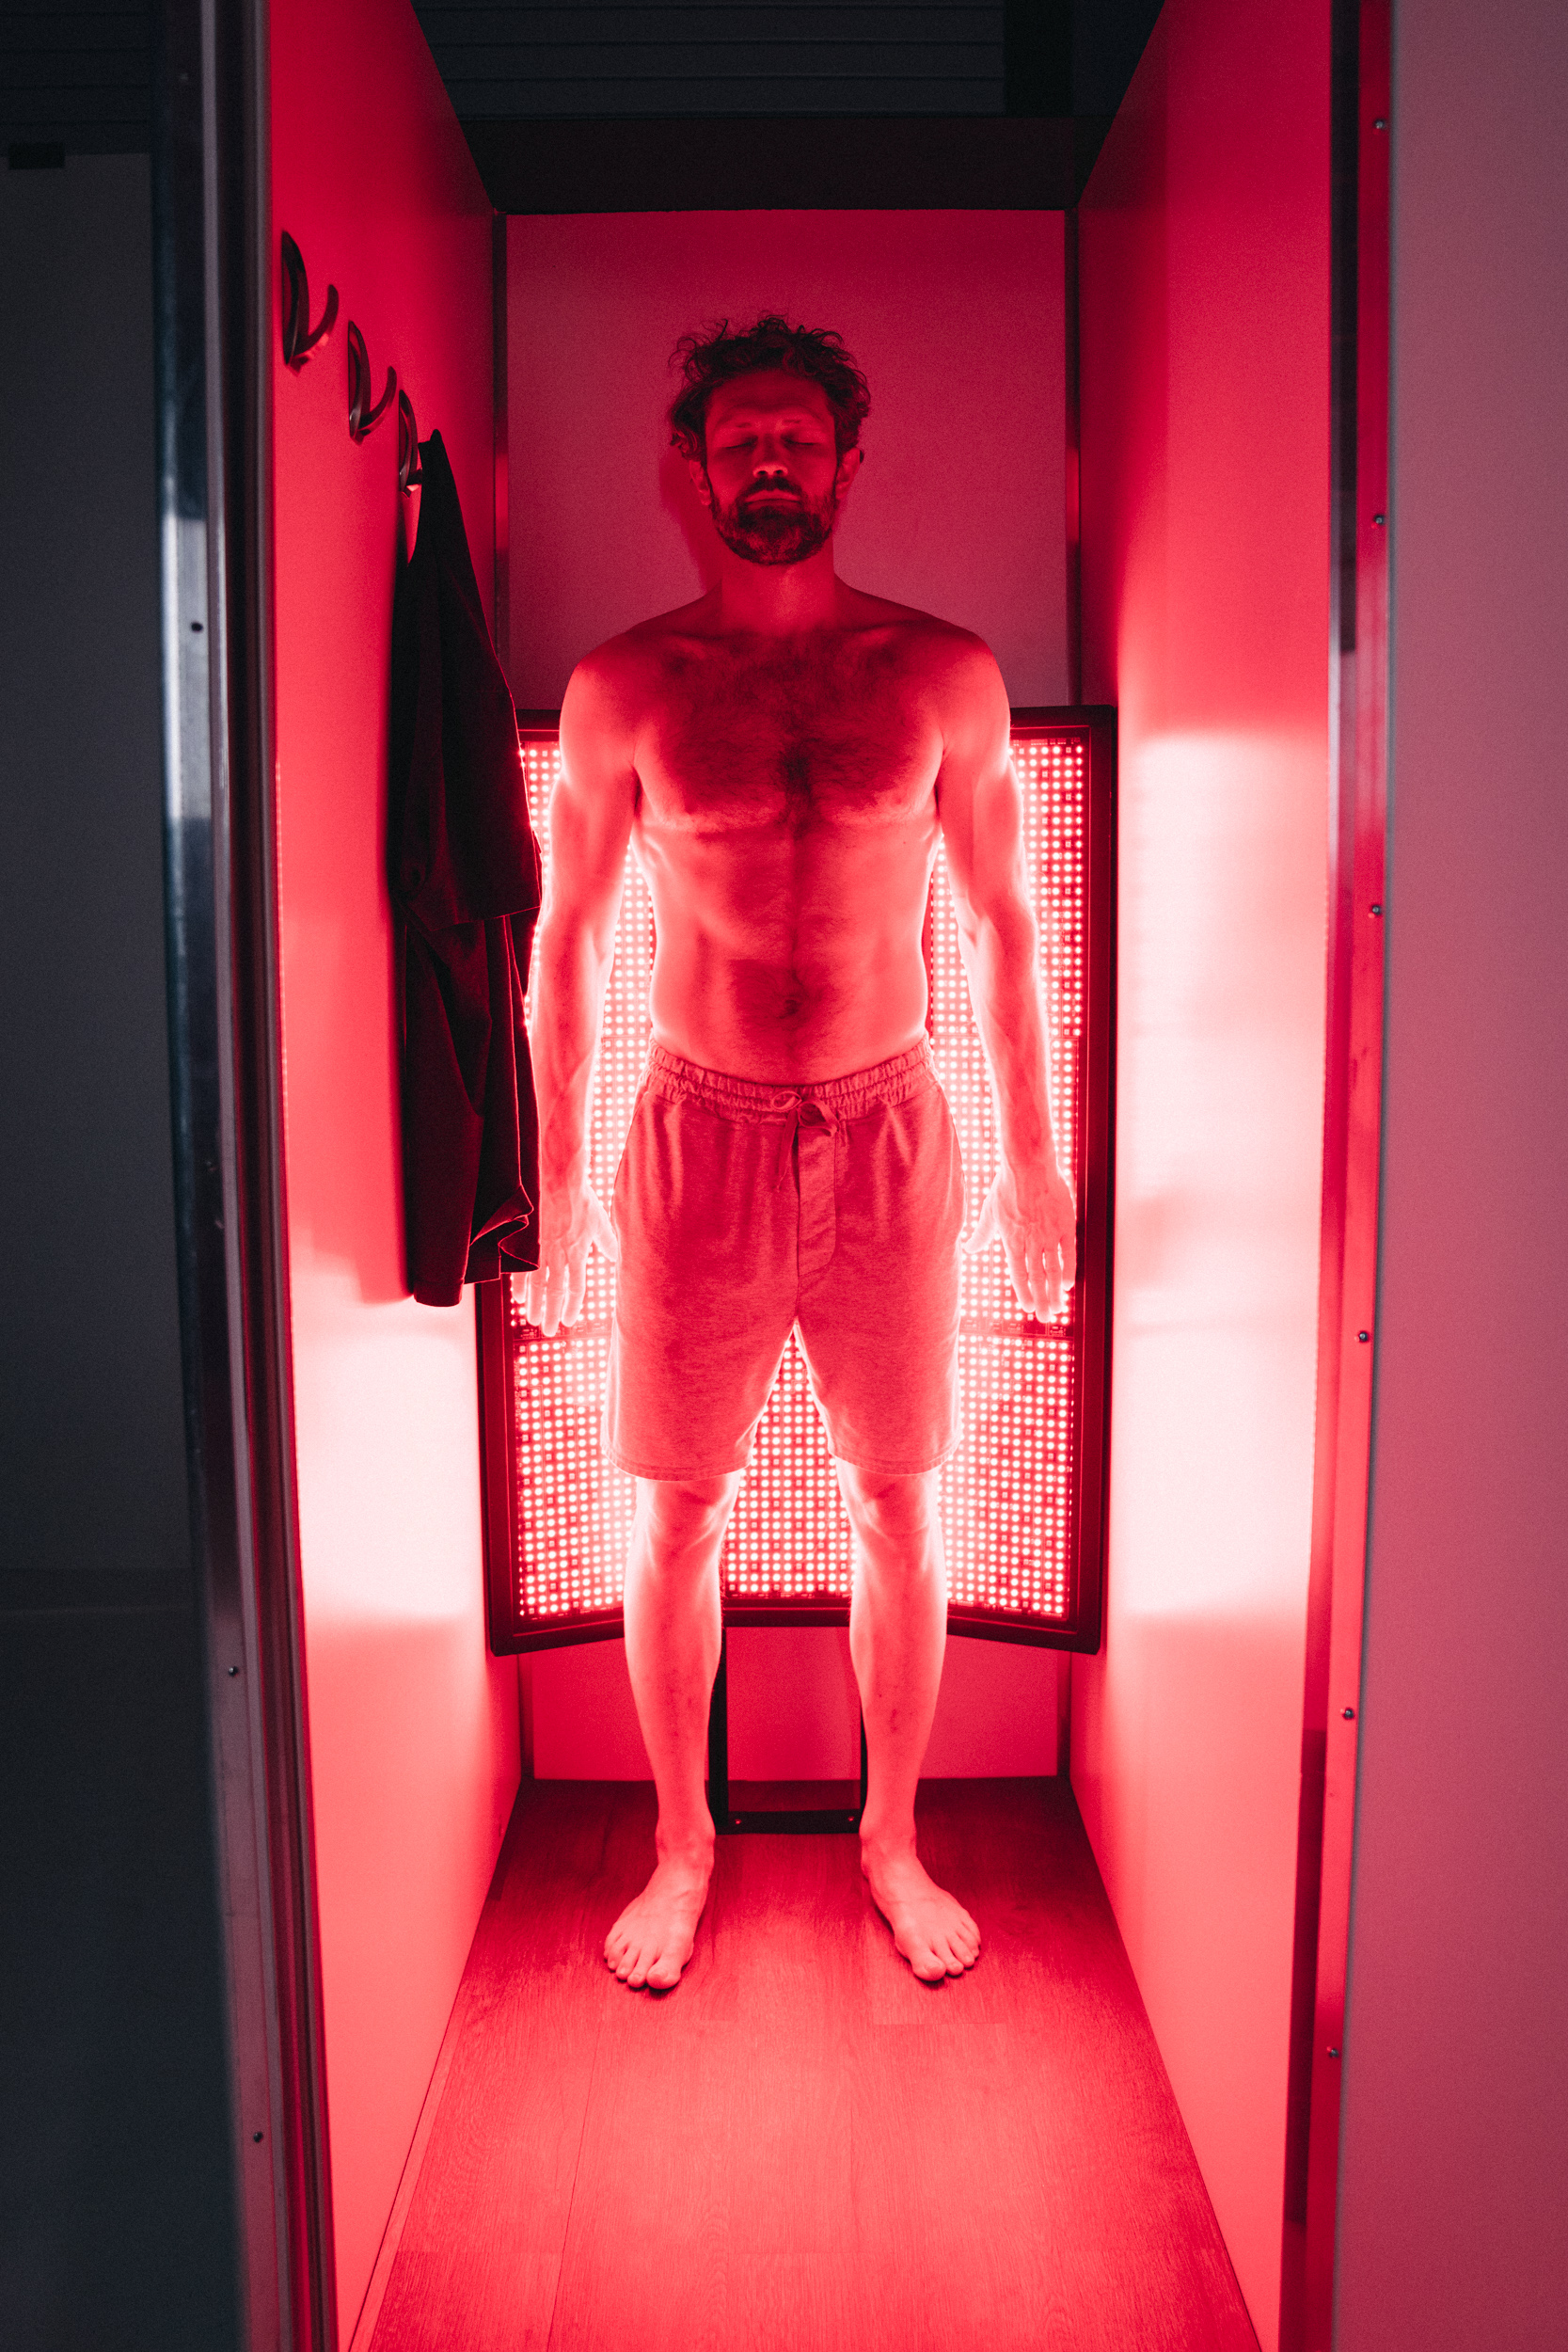 Increase Your Chiropractic Revenue with Red Light Therapy